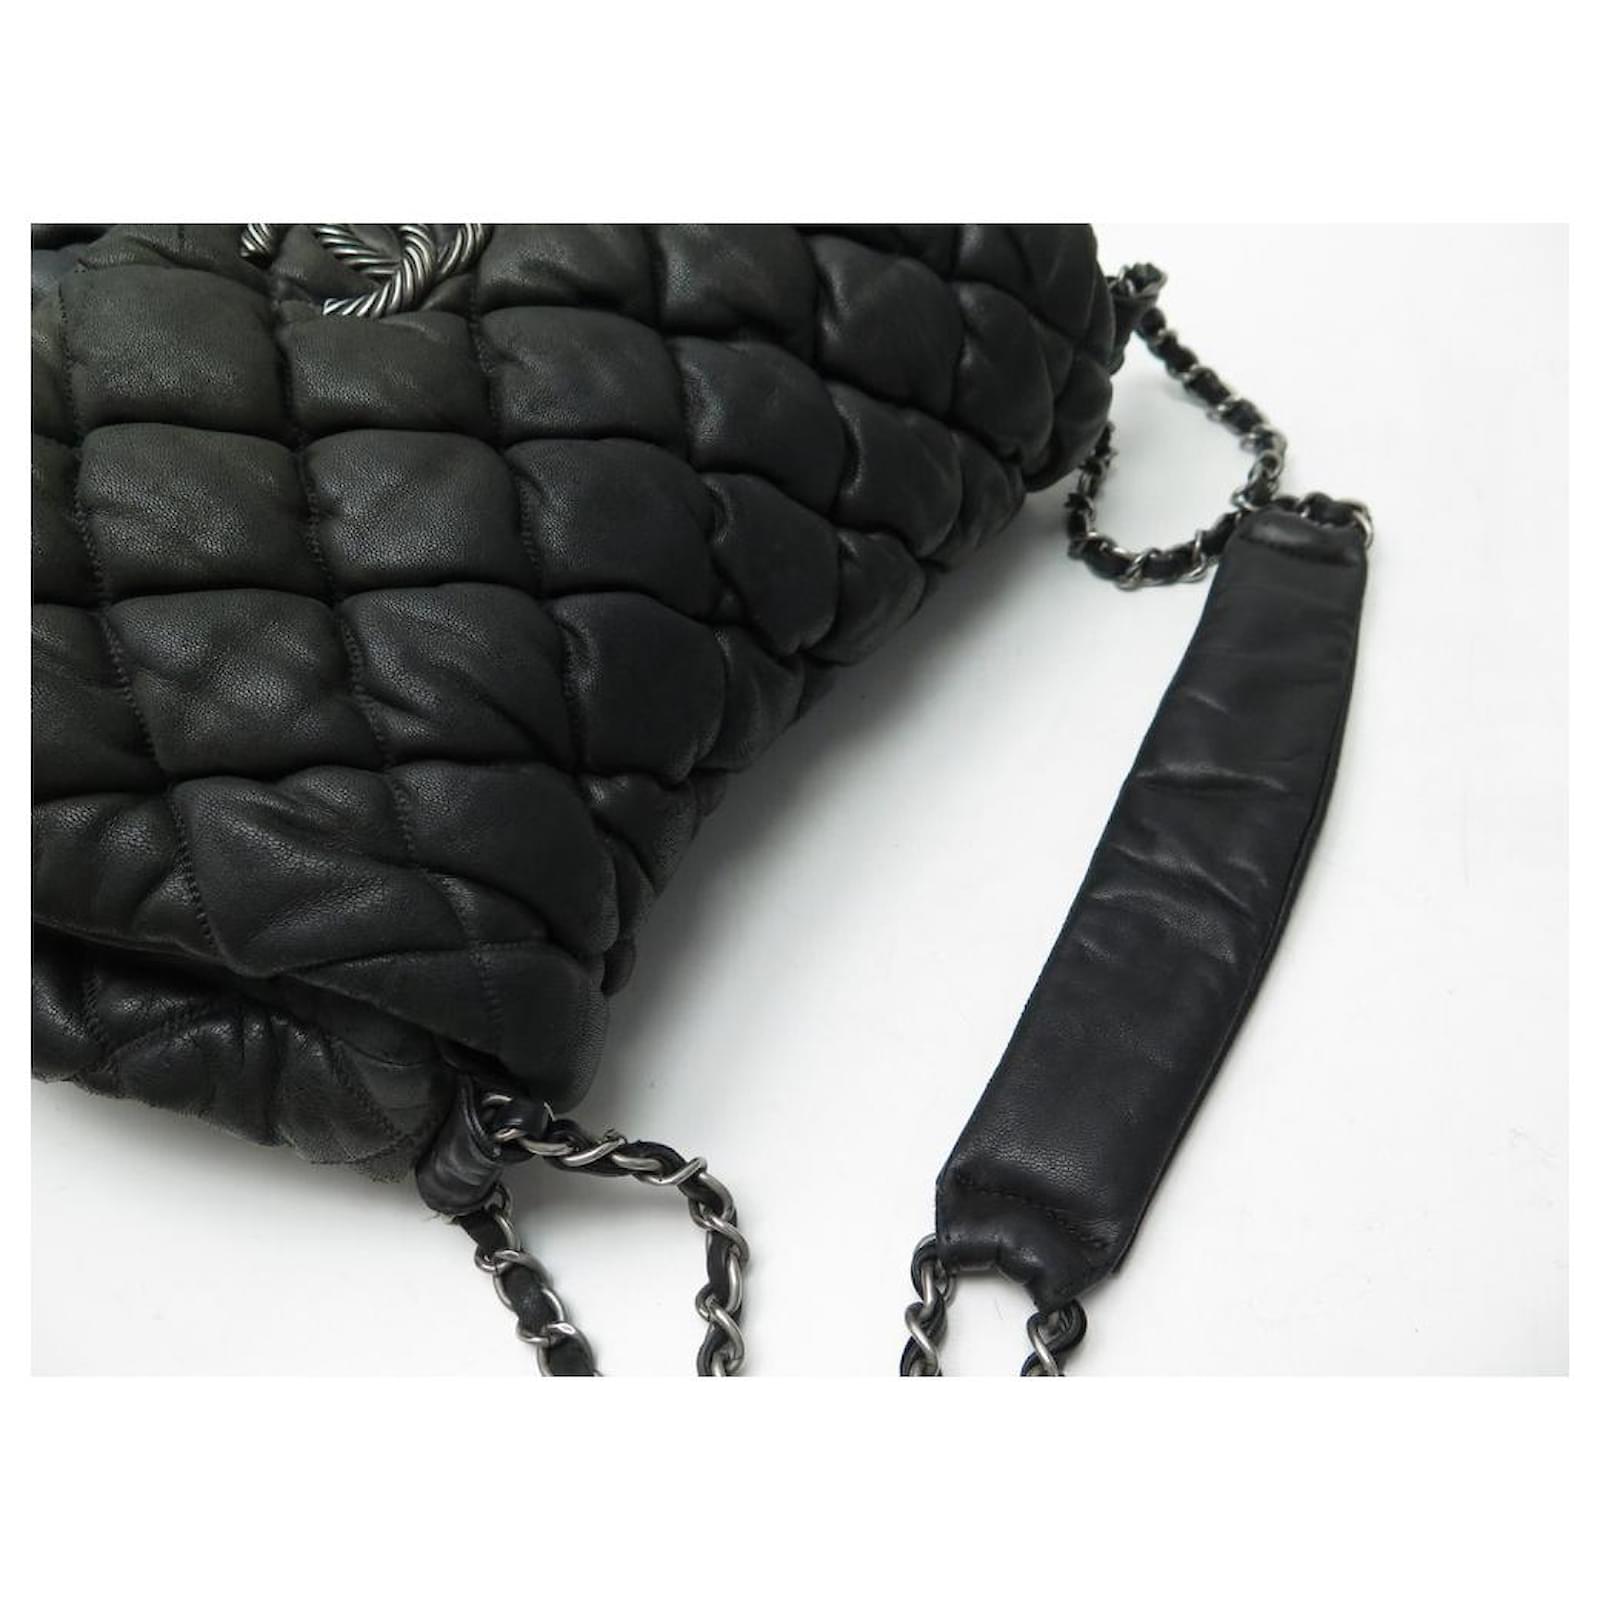 CHANEL HOBO HANDBAG IN BLACK QUILTED LEATHER LOGO CC QUILTED BAG PURSE